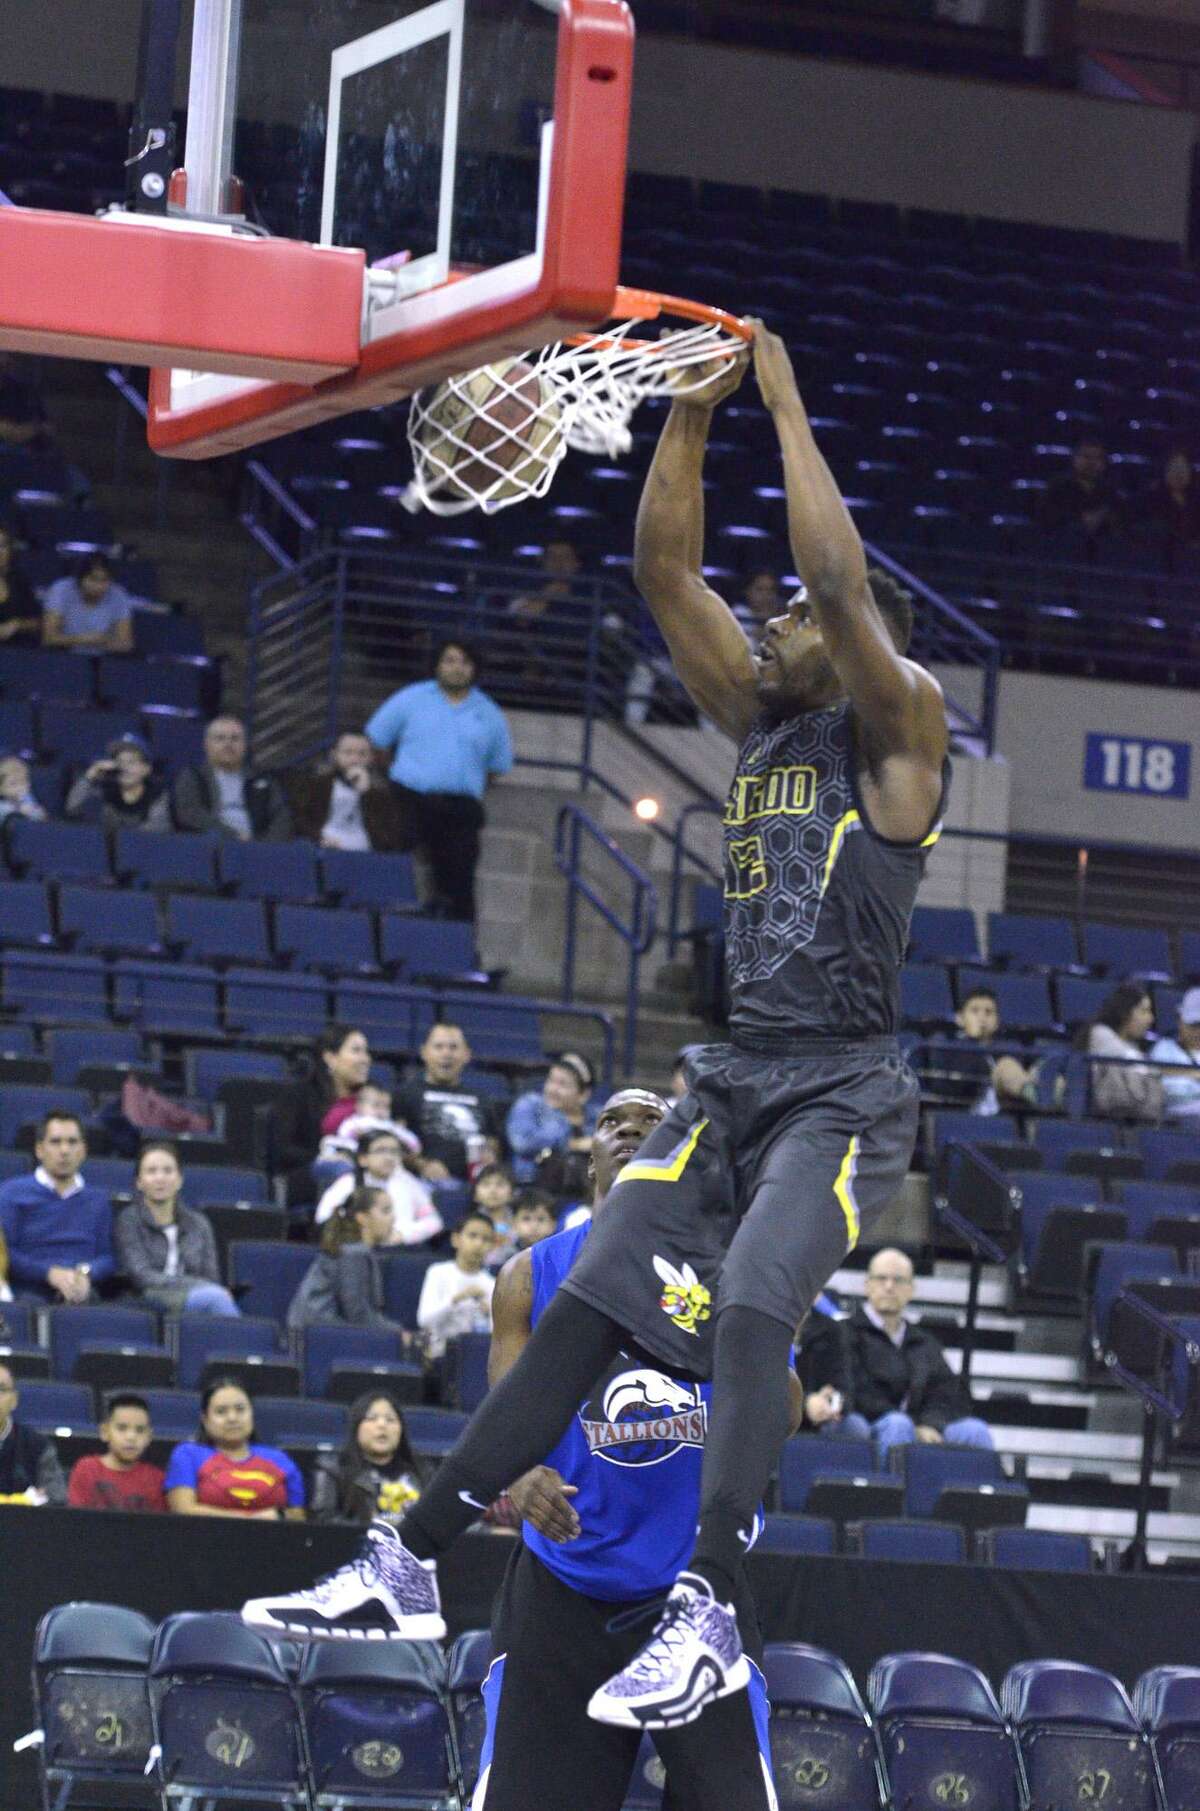 Tavien Rosemond and the Swarm host Kyle Wednesday at 7 p.m. for the third time this season after winning the previous two meetings each by the score of 120-114. Laredo will then play a dangerous Texas Red Wolves roster Thursday at 7.